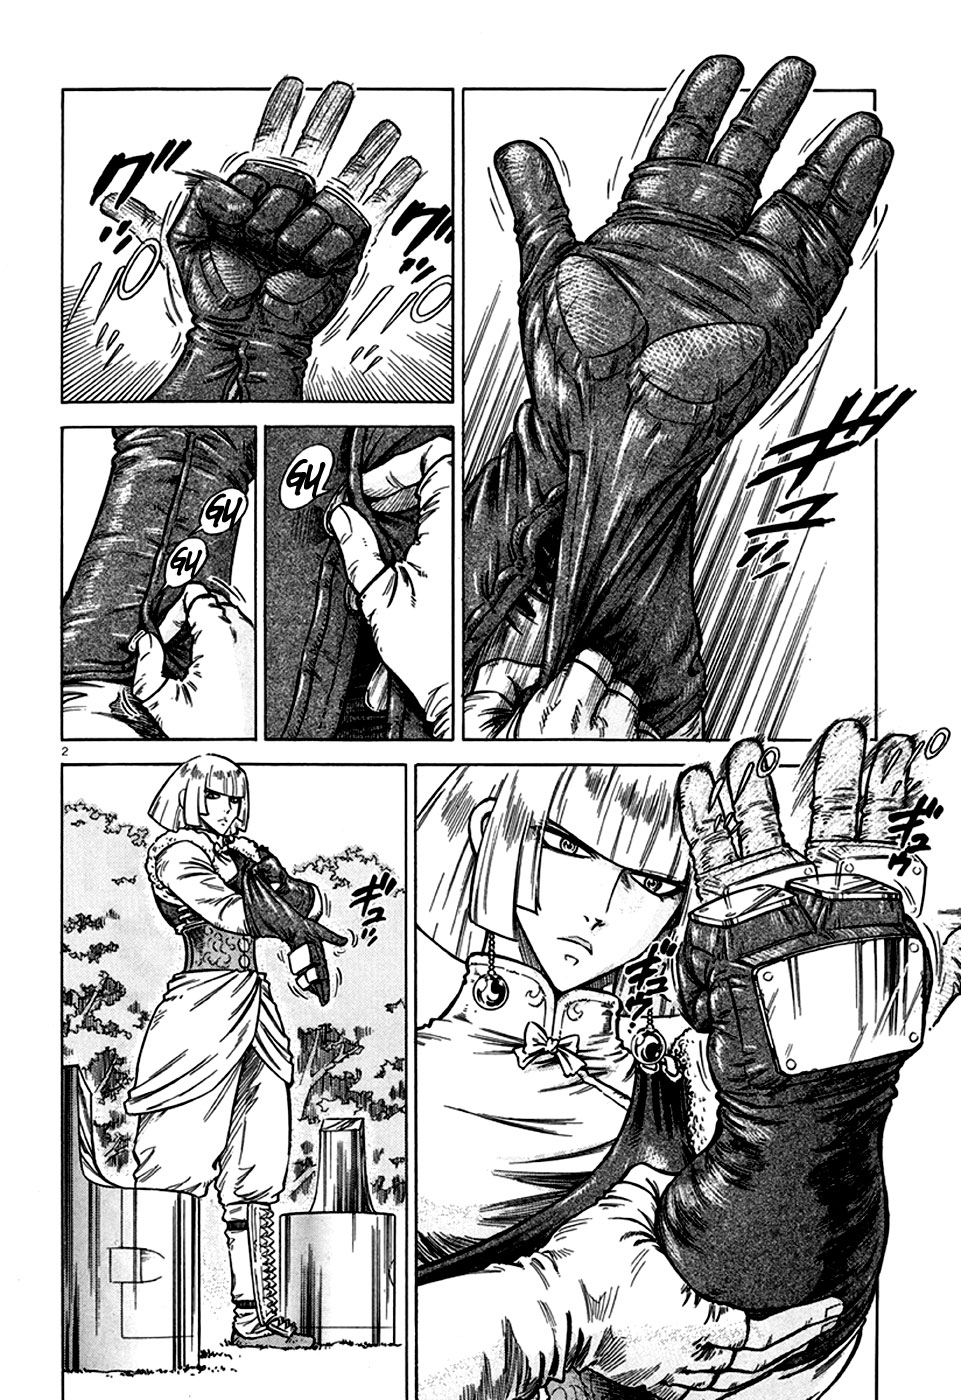 Stravaganza - Isai No Hime Vol.2 Chapter 14: Mjolnir S Grip - Picture 3